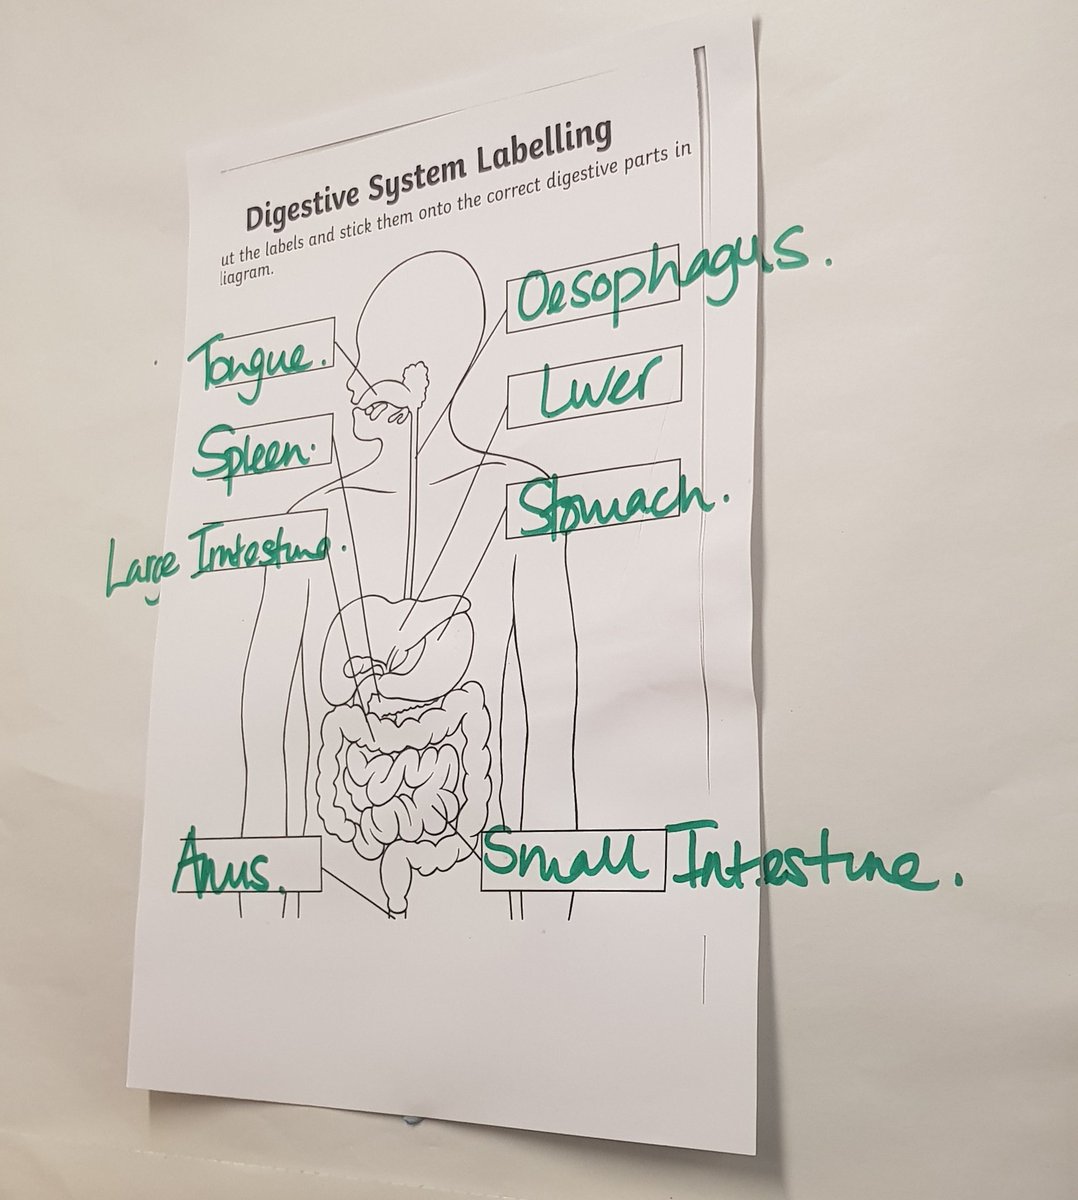 Doing some #crosscurricular learning - the digestive system is for #topiclessons, #englishlessons and #sciencelessons this half-term. The kids are loving it so far!

#EduChat #PGCEChat #EduTwitter #PrimarySchool #PrimarySchoolTeaching #TraineeTeacher